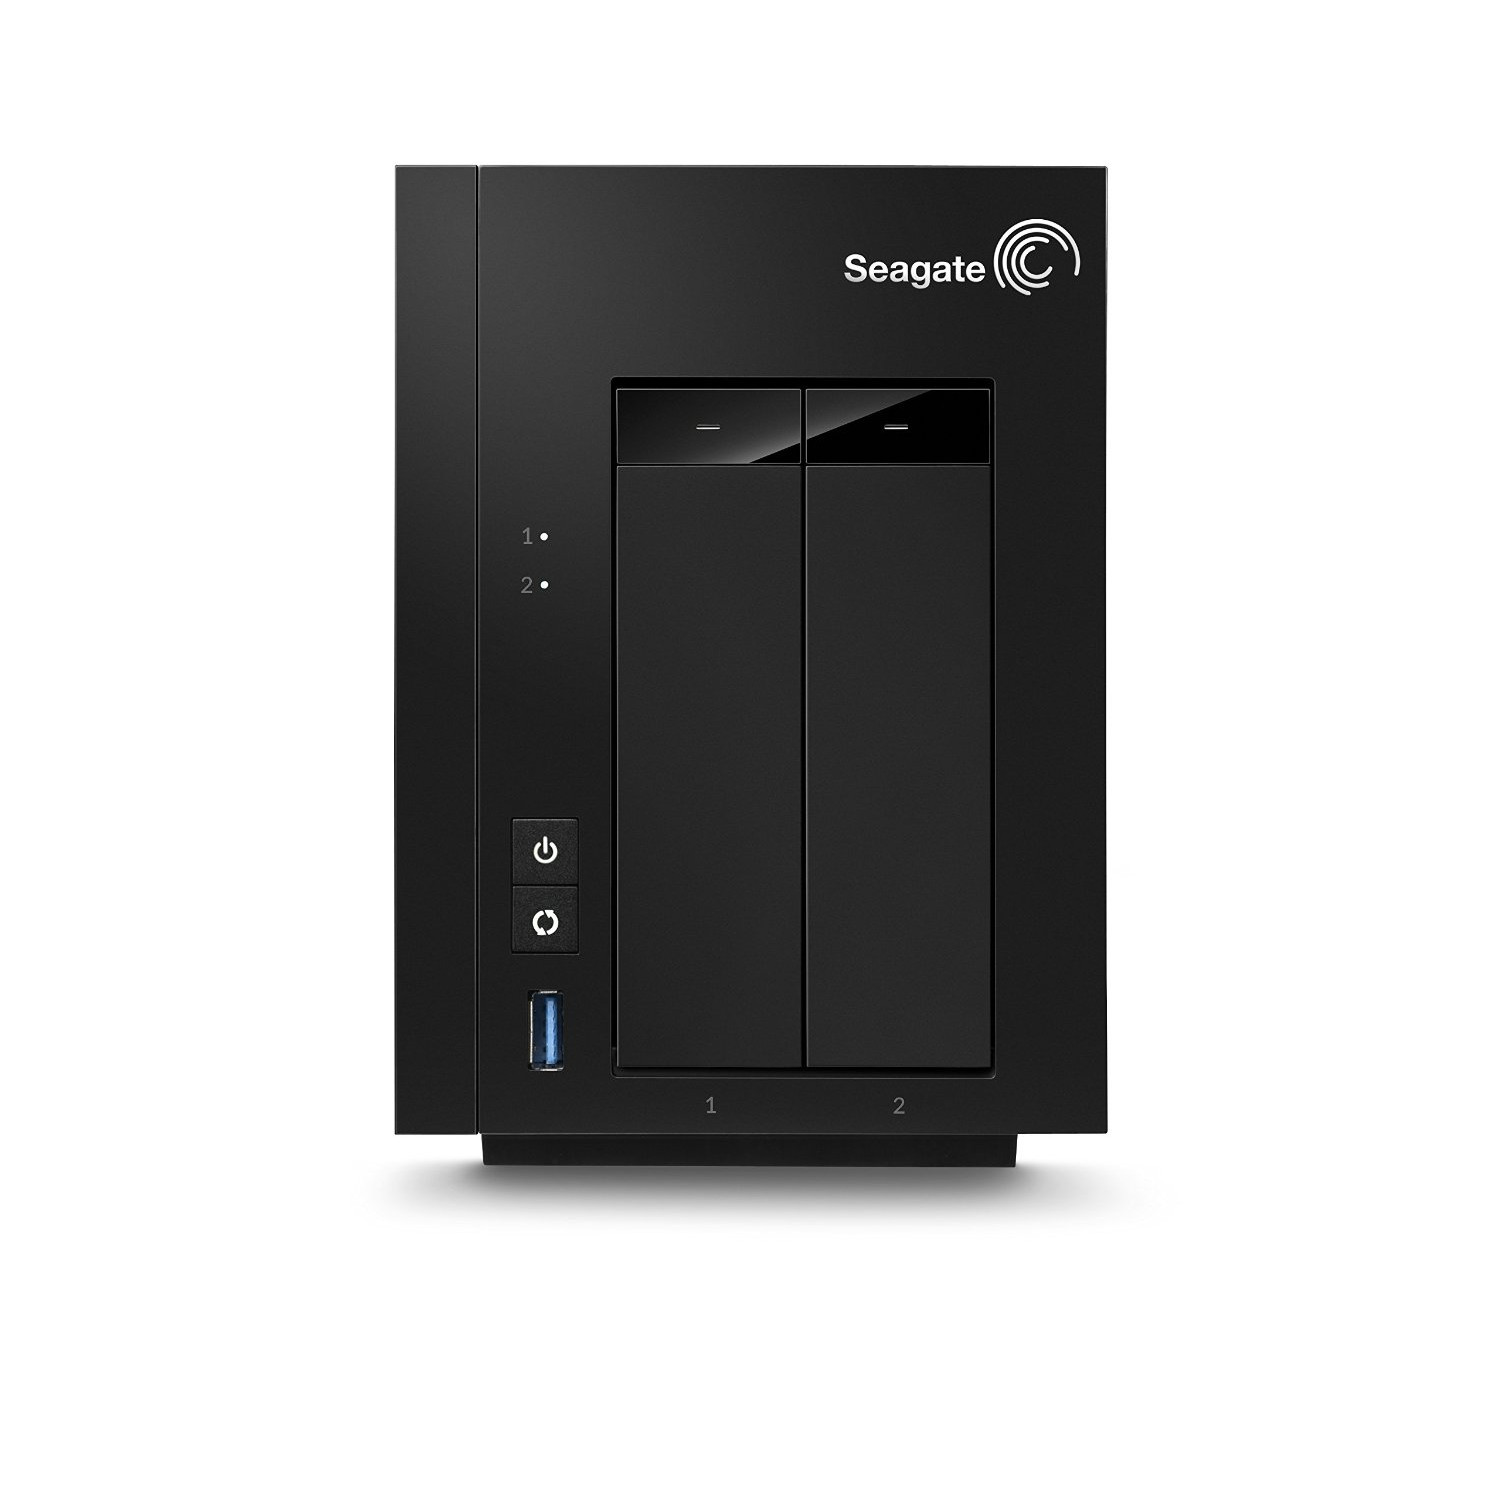  Network Attached Storage Seagate NAS 2-bay 4TB 